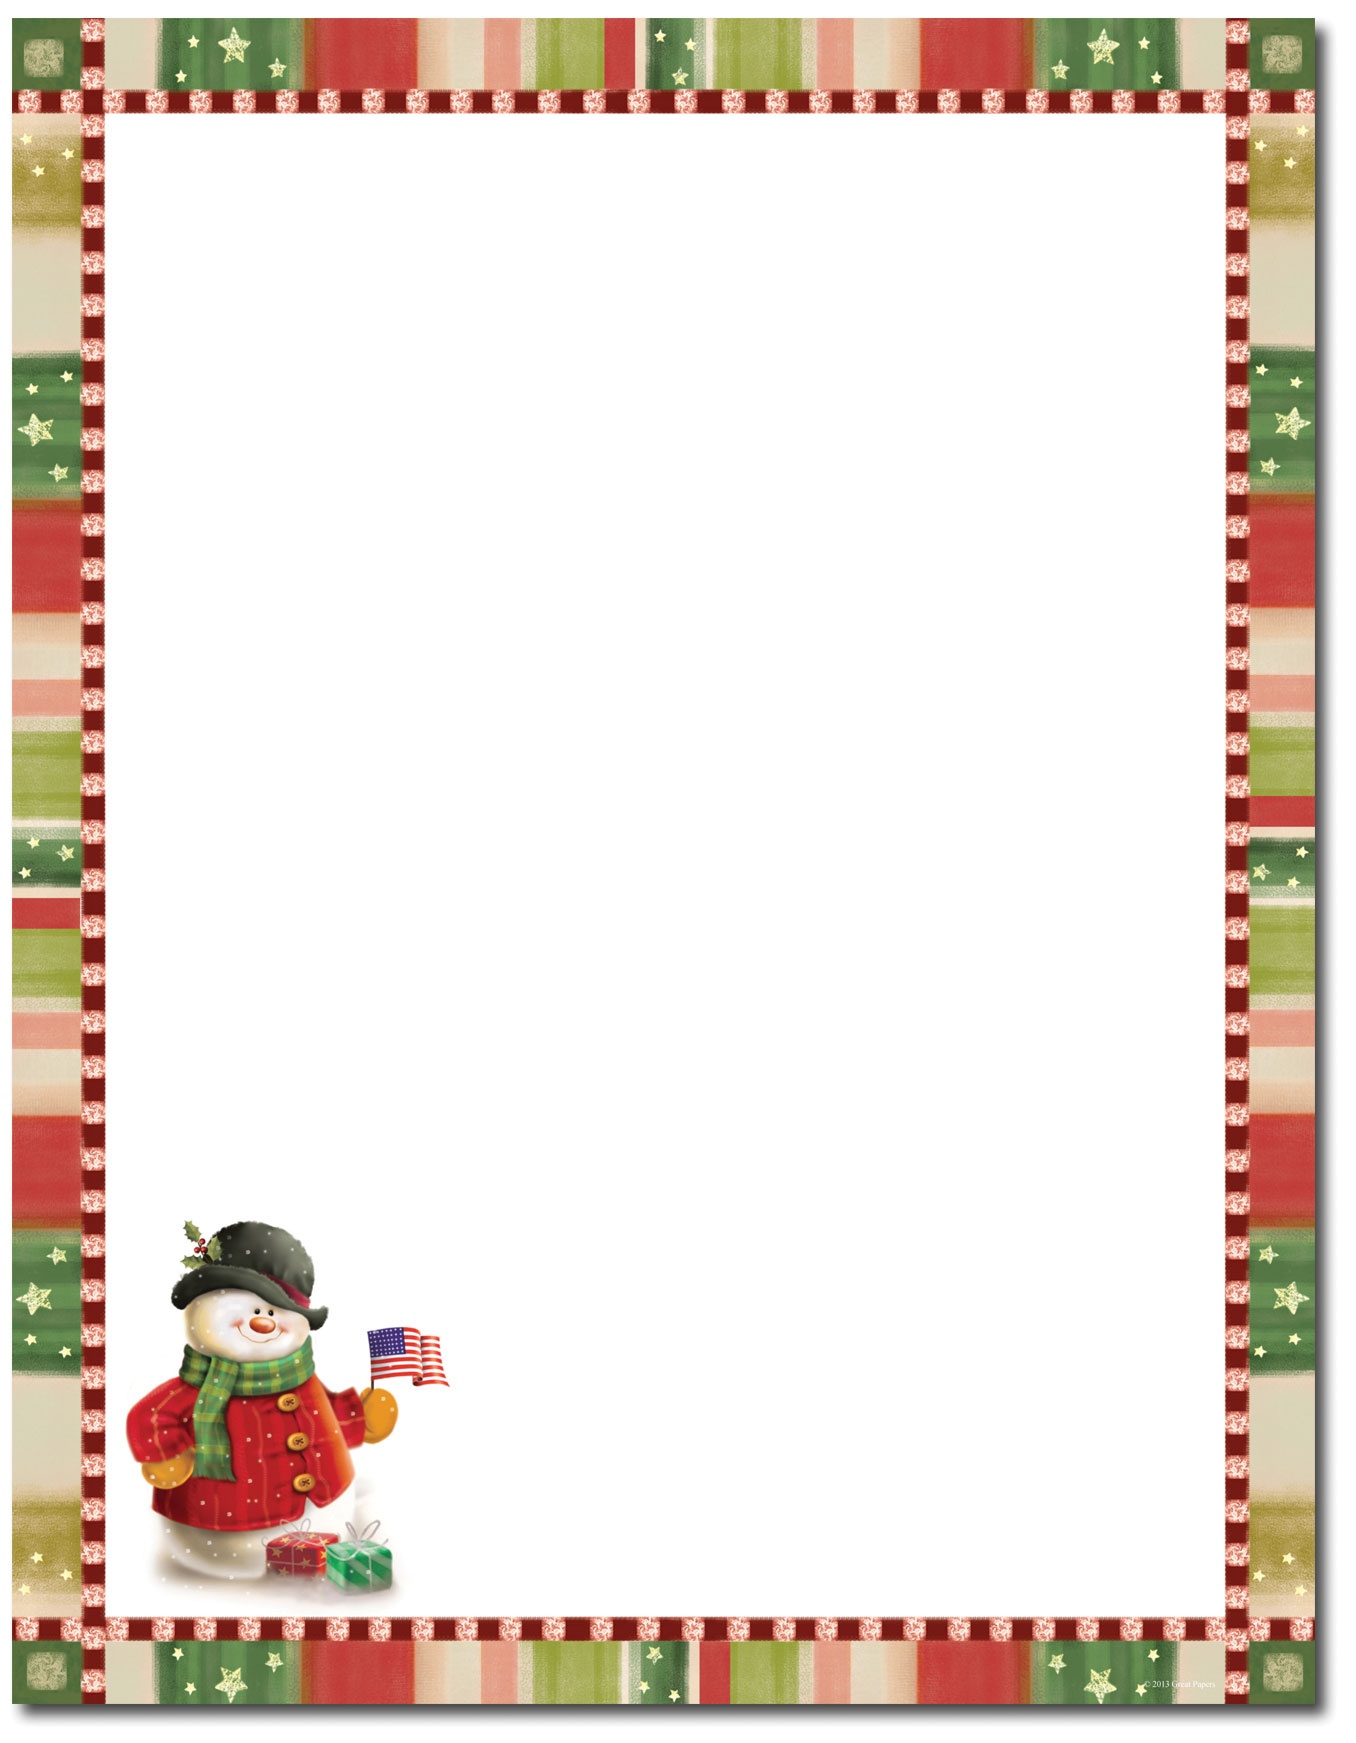 Free Christmas Letterhead Cliparts, Download Free Clip Art, Free - Free Printable Christmas Letterhead